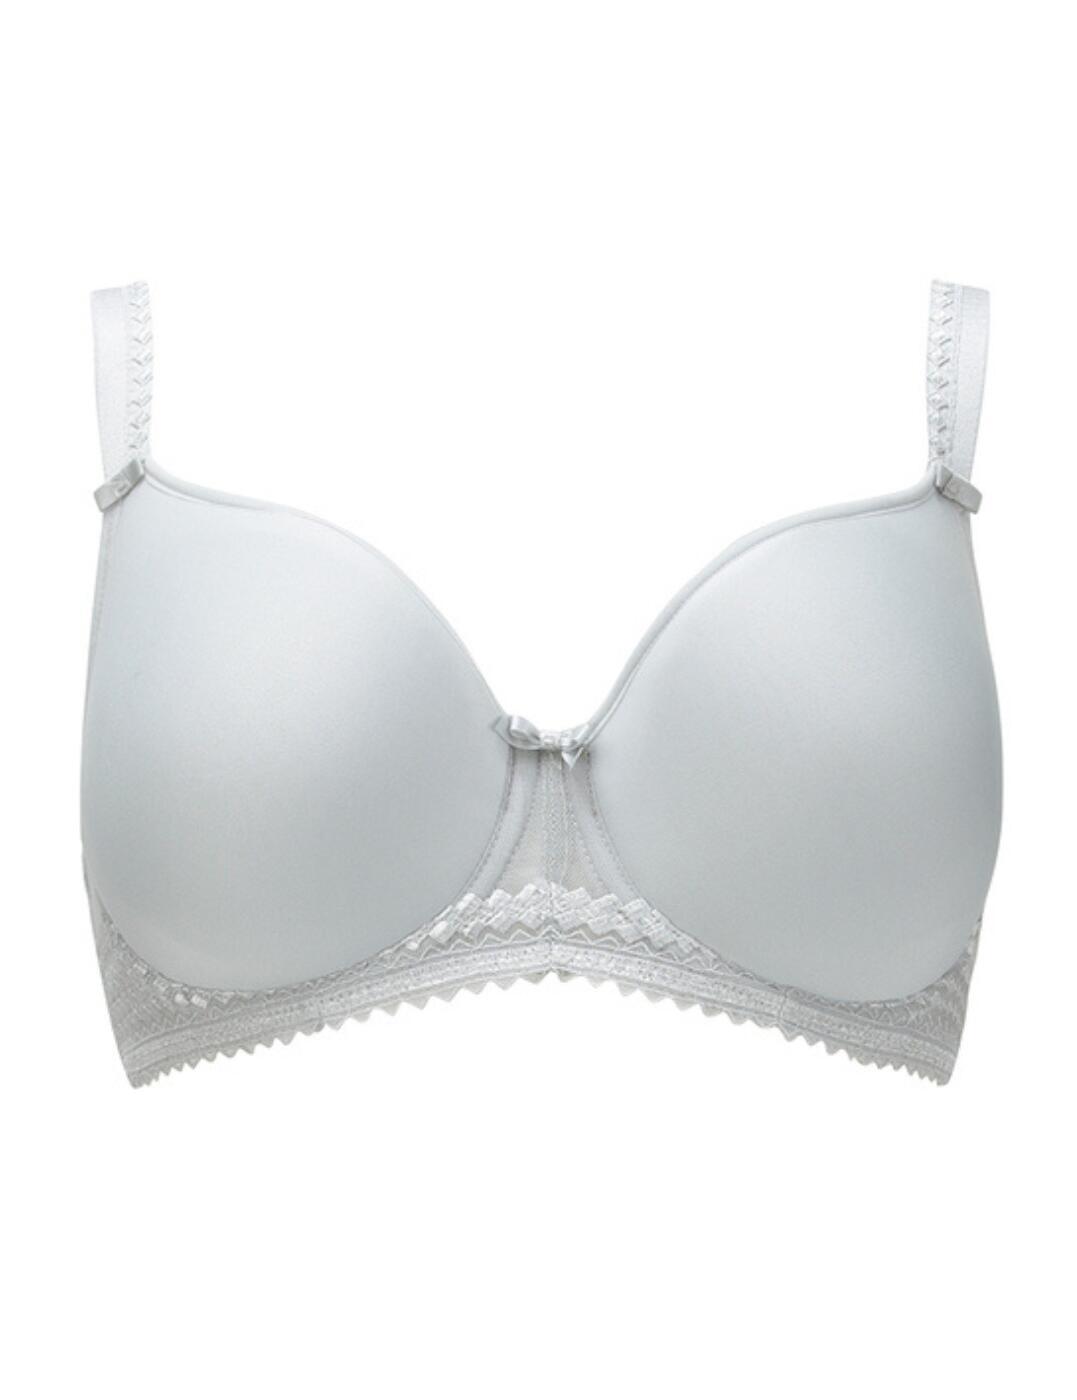 Fantasie Rebecca FL2024 W Underwired Spacer Moulded Full Cup Bra White 38F  CS for sale online